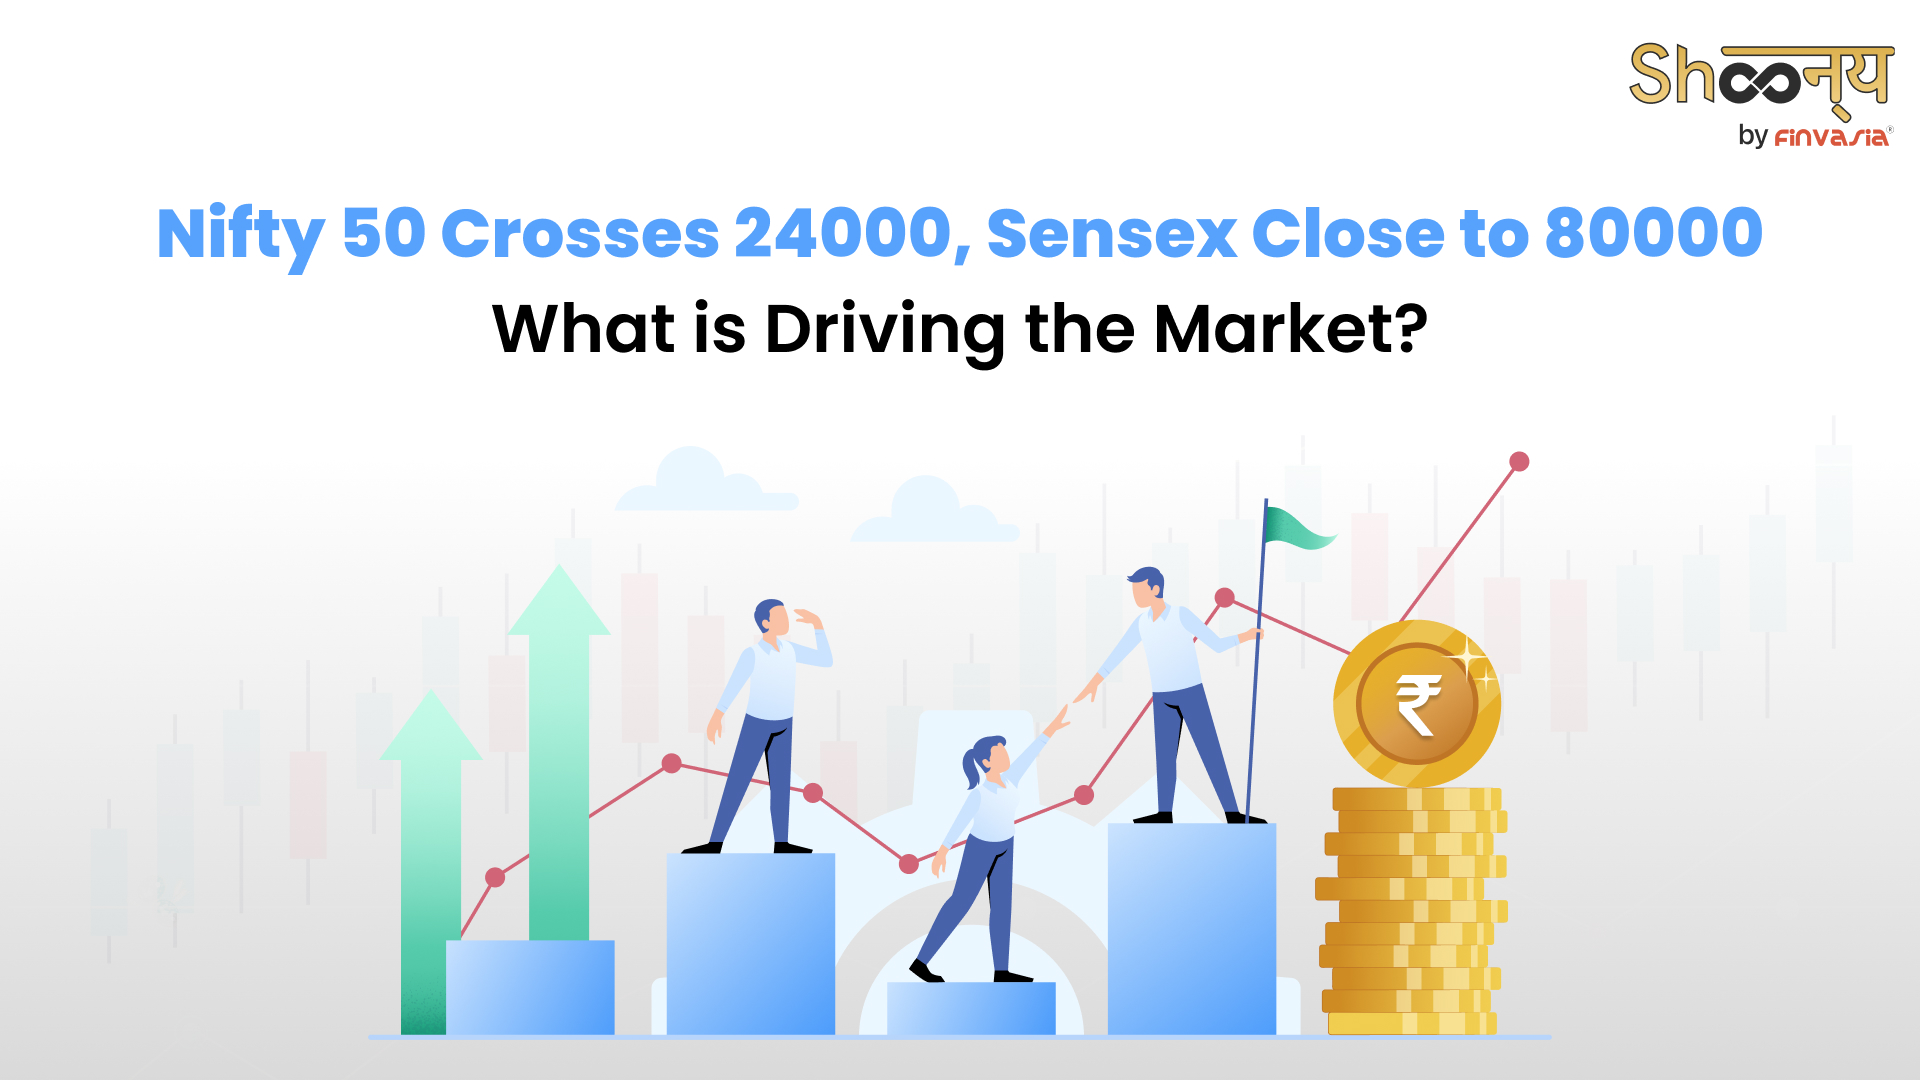 Nifty 50 crosses 24000, Sensex close to 80000 – What is driving the market